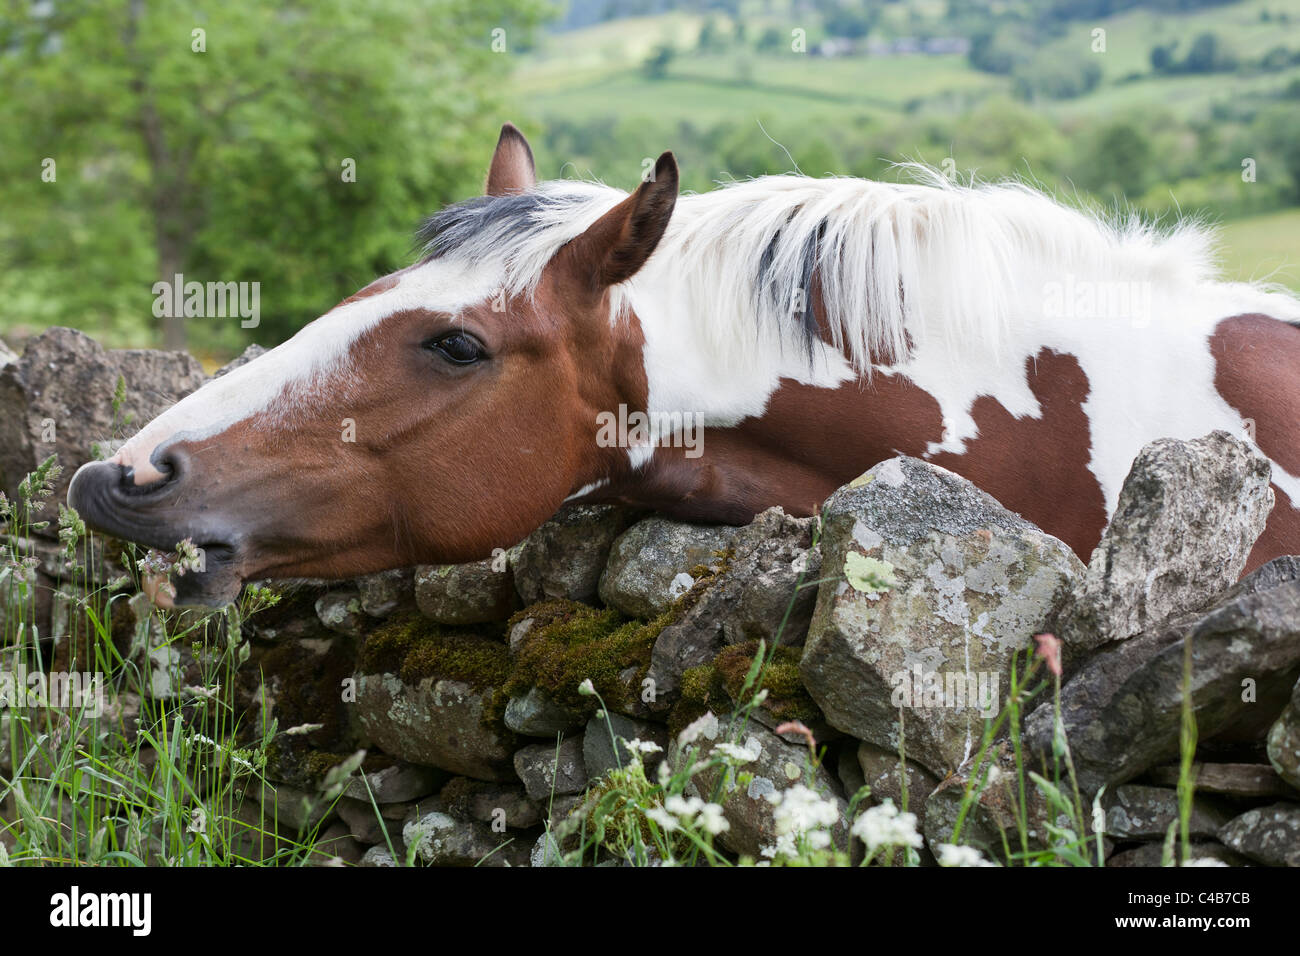 A skewbald horse leaning over a drystone wall showing just the head and neck with the Cumbrian Fells in the background Stock Photo